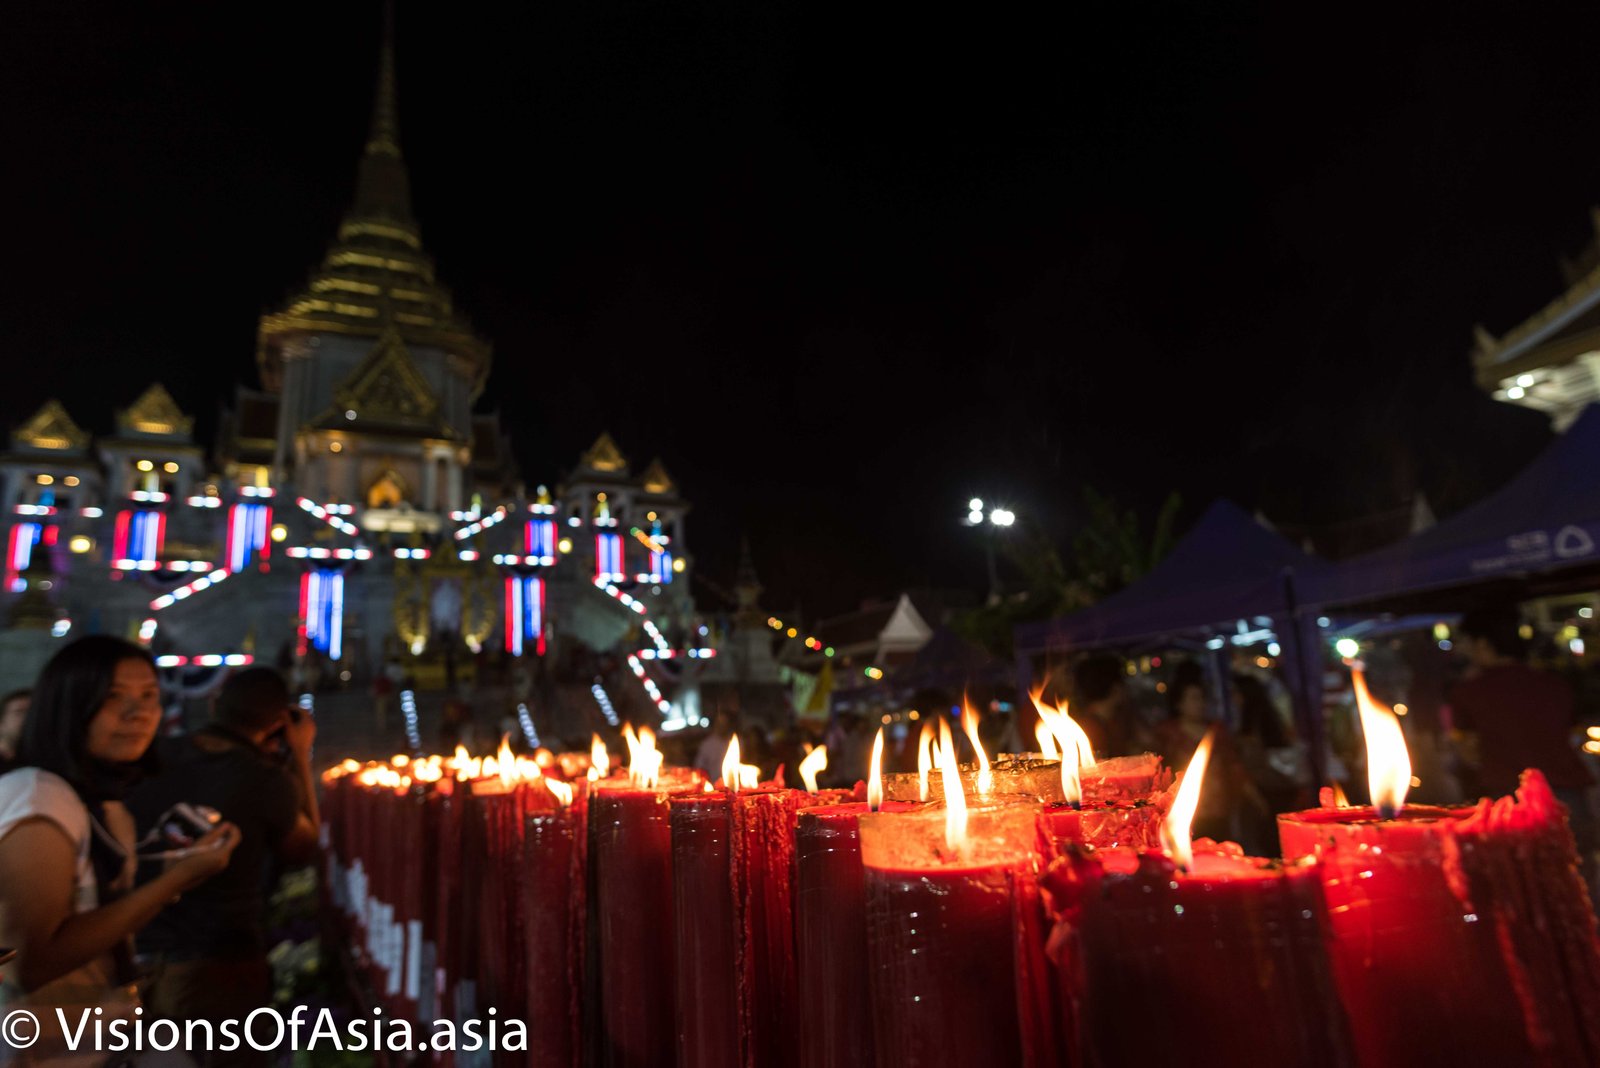 Candles of Wat Traimit